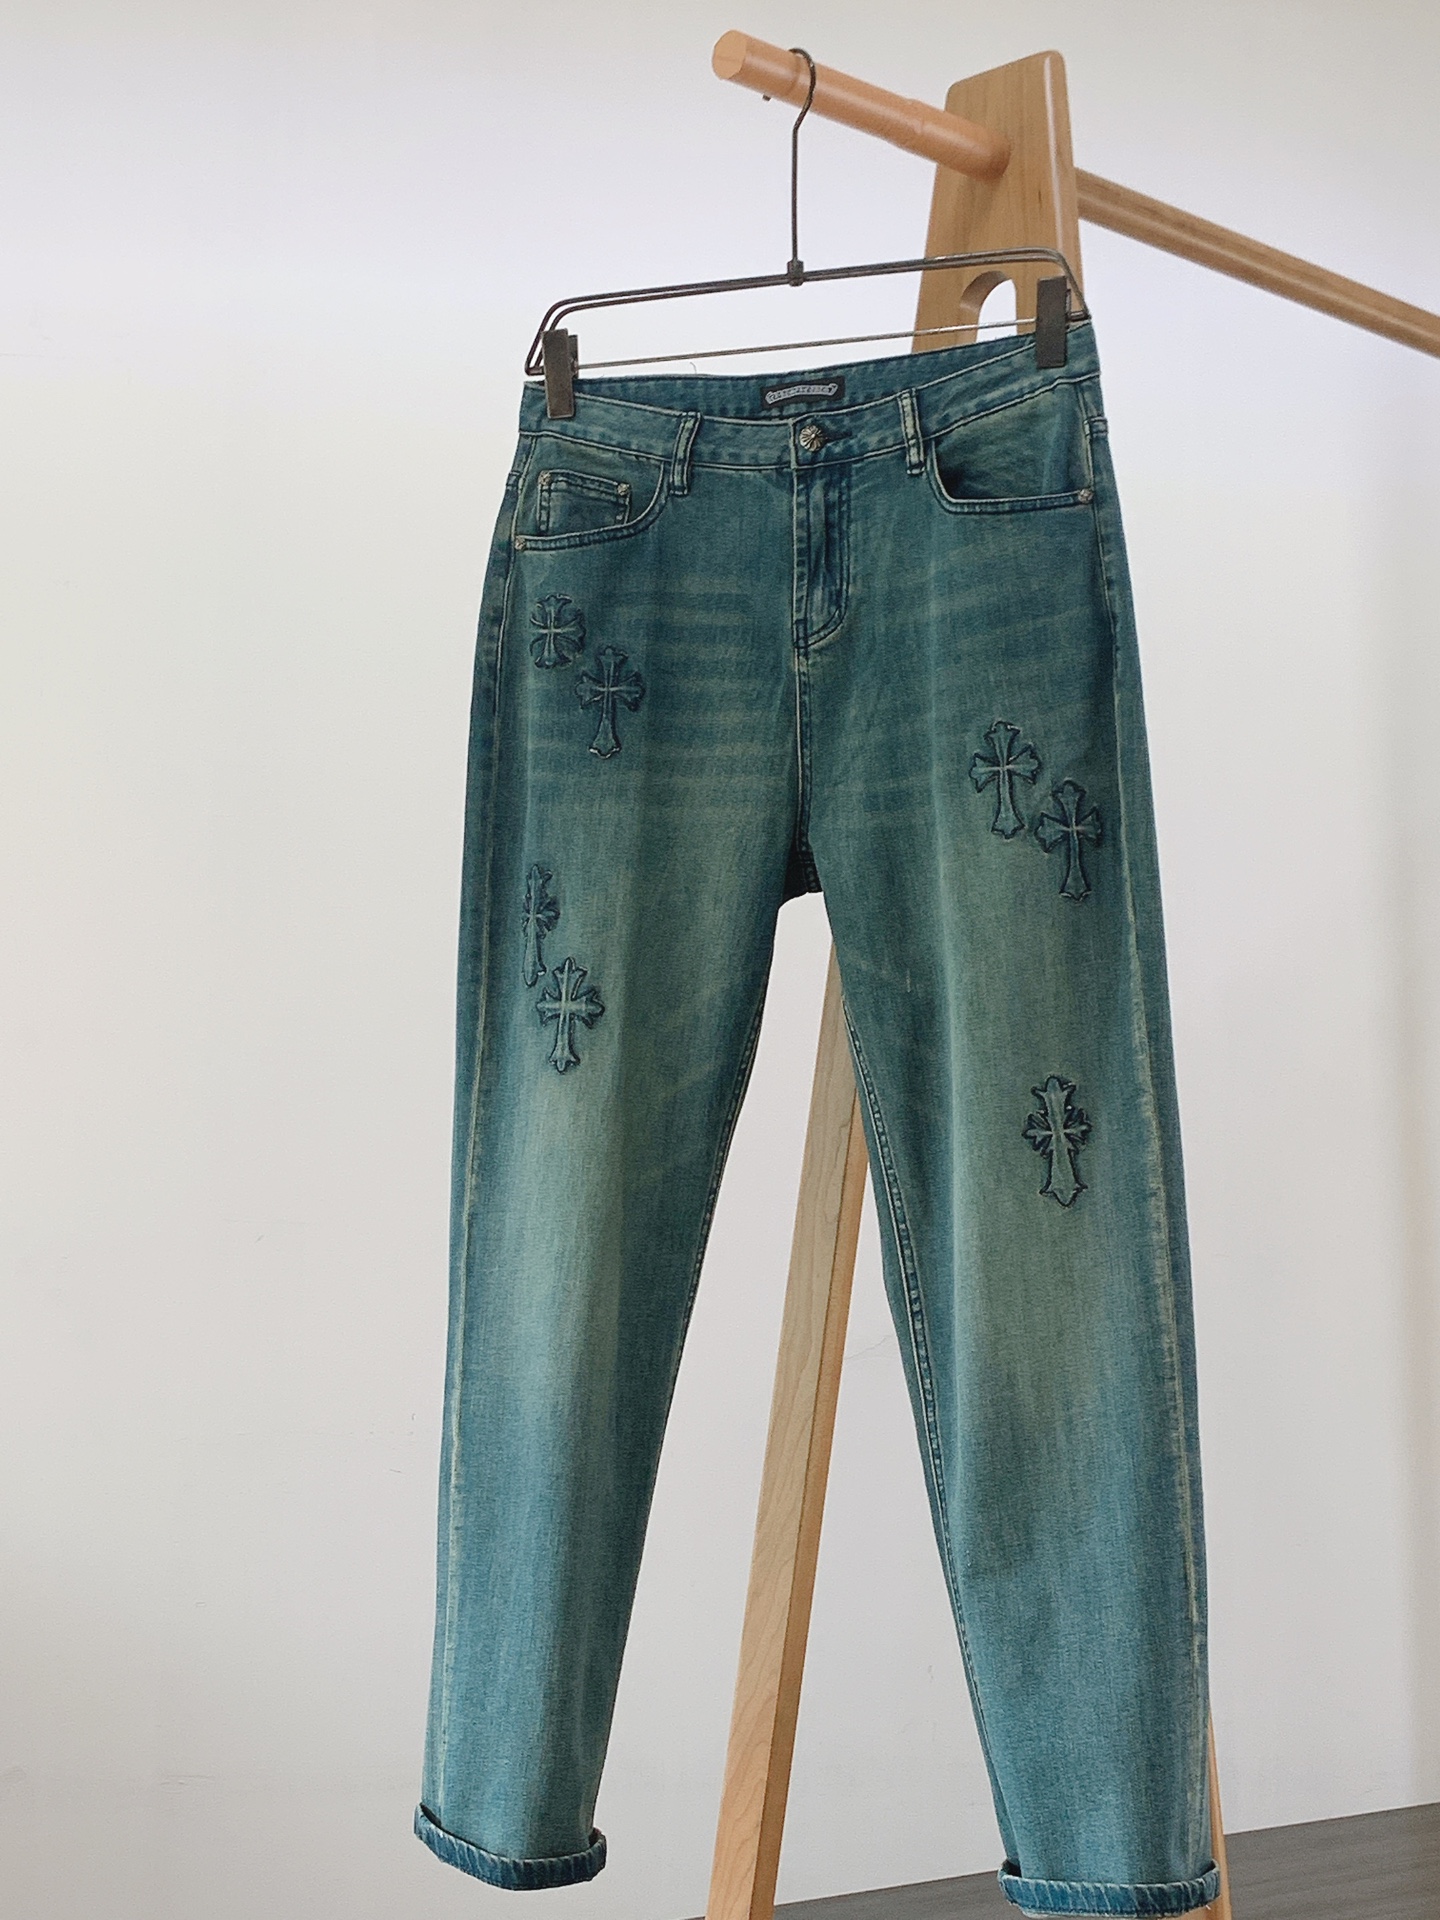 Chrome Hearts Clothing Jeans Sell Online Luxury Designer
 Spring/Summer Collection Vintage